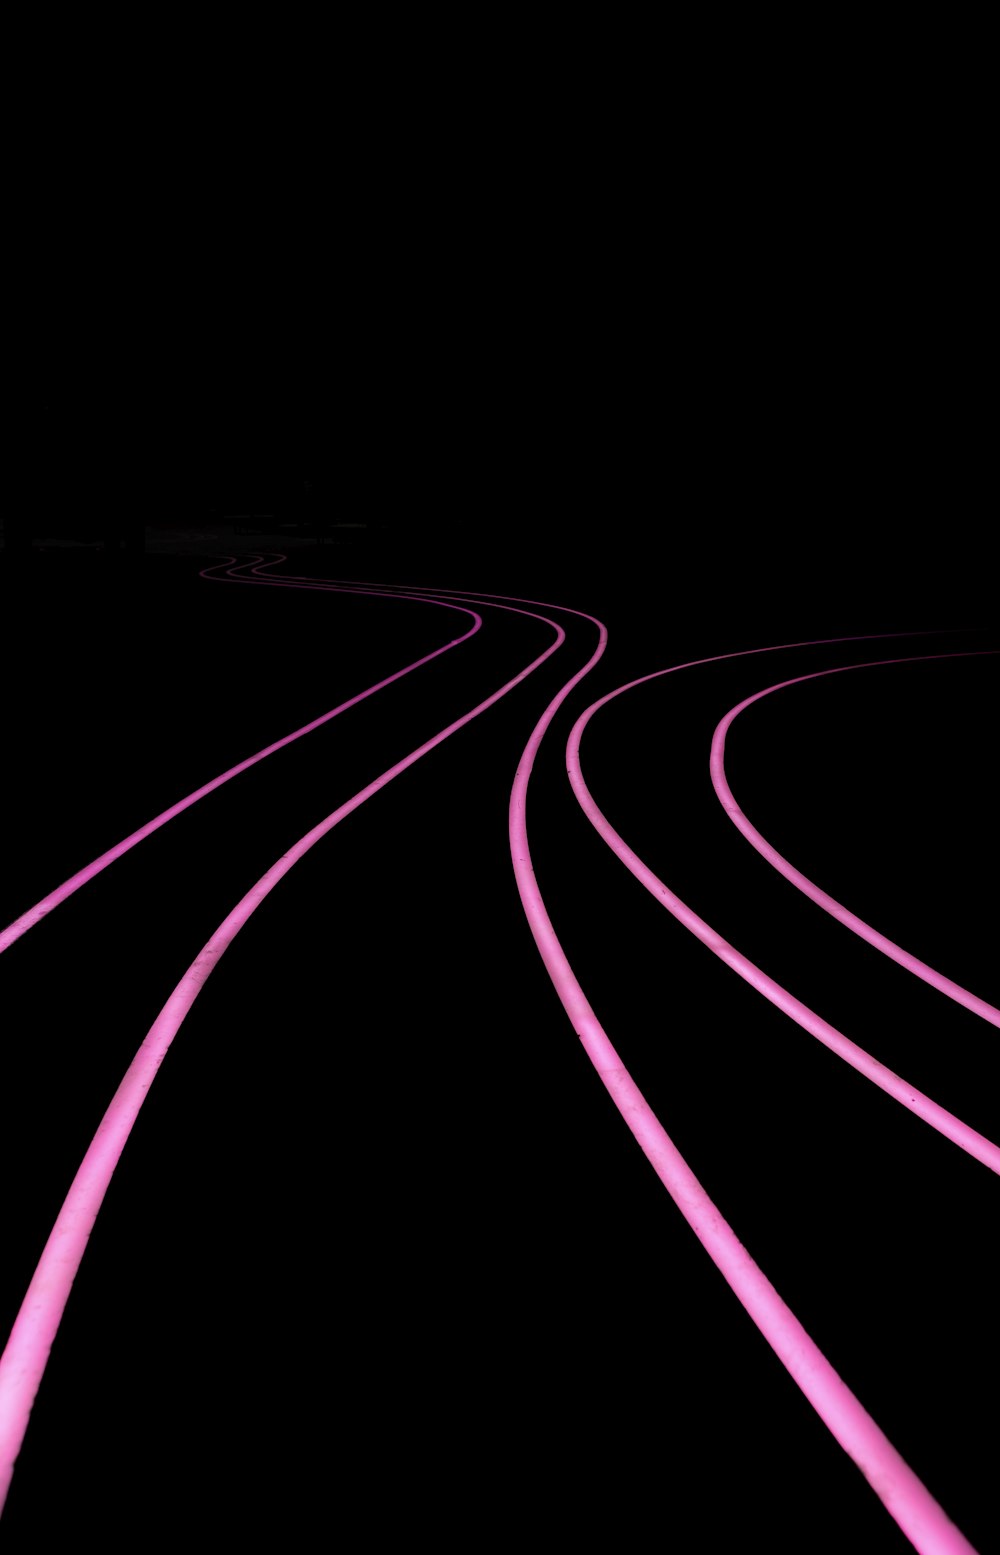 a black and pink photo of a train track